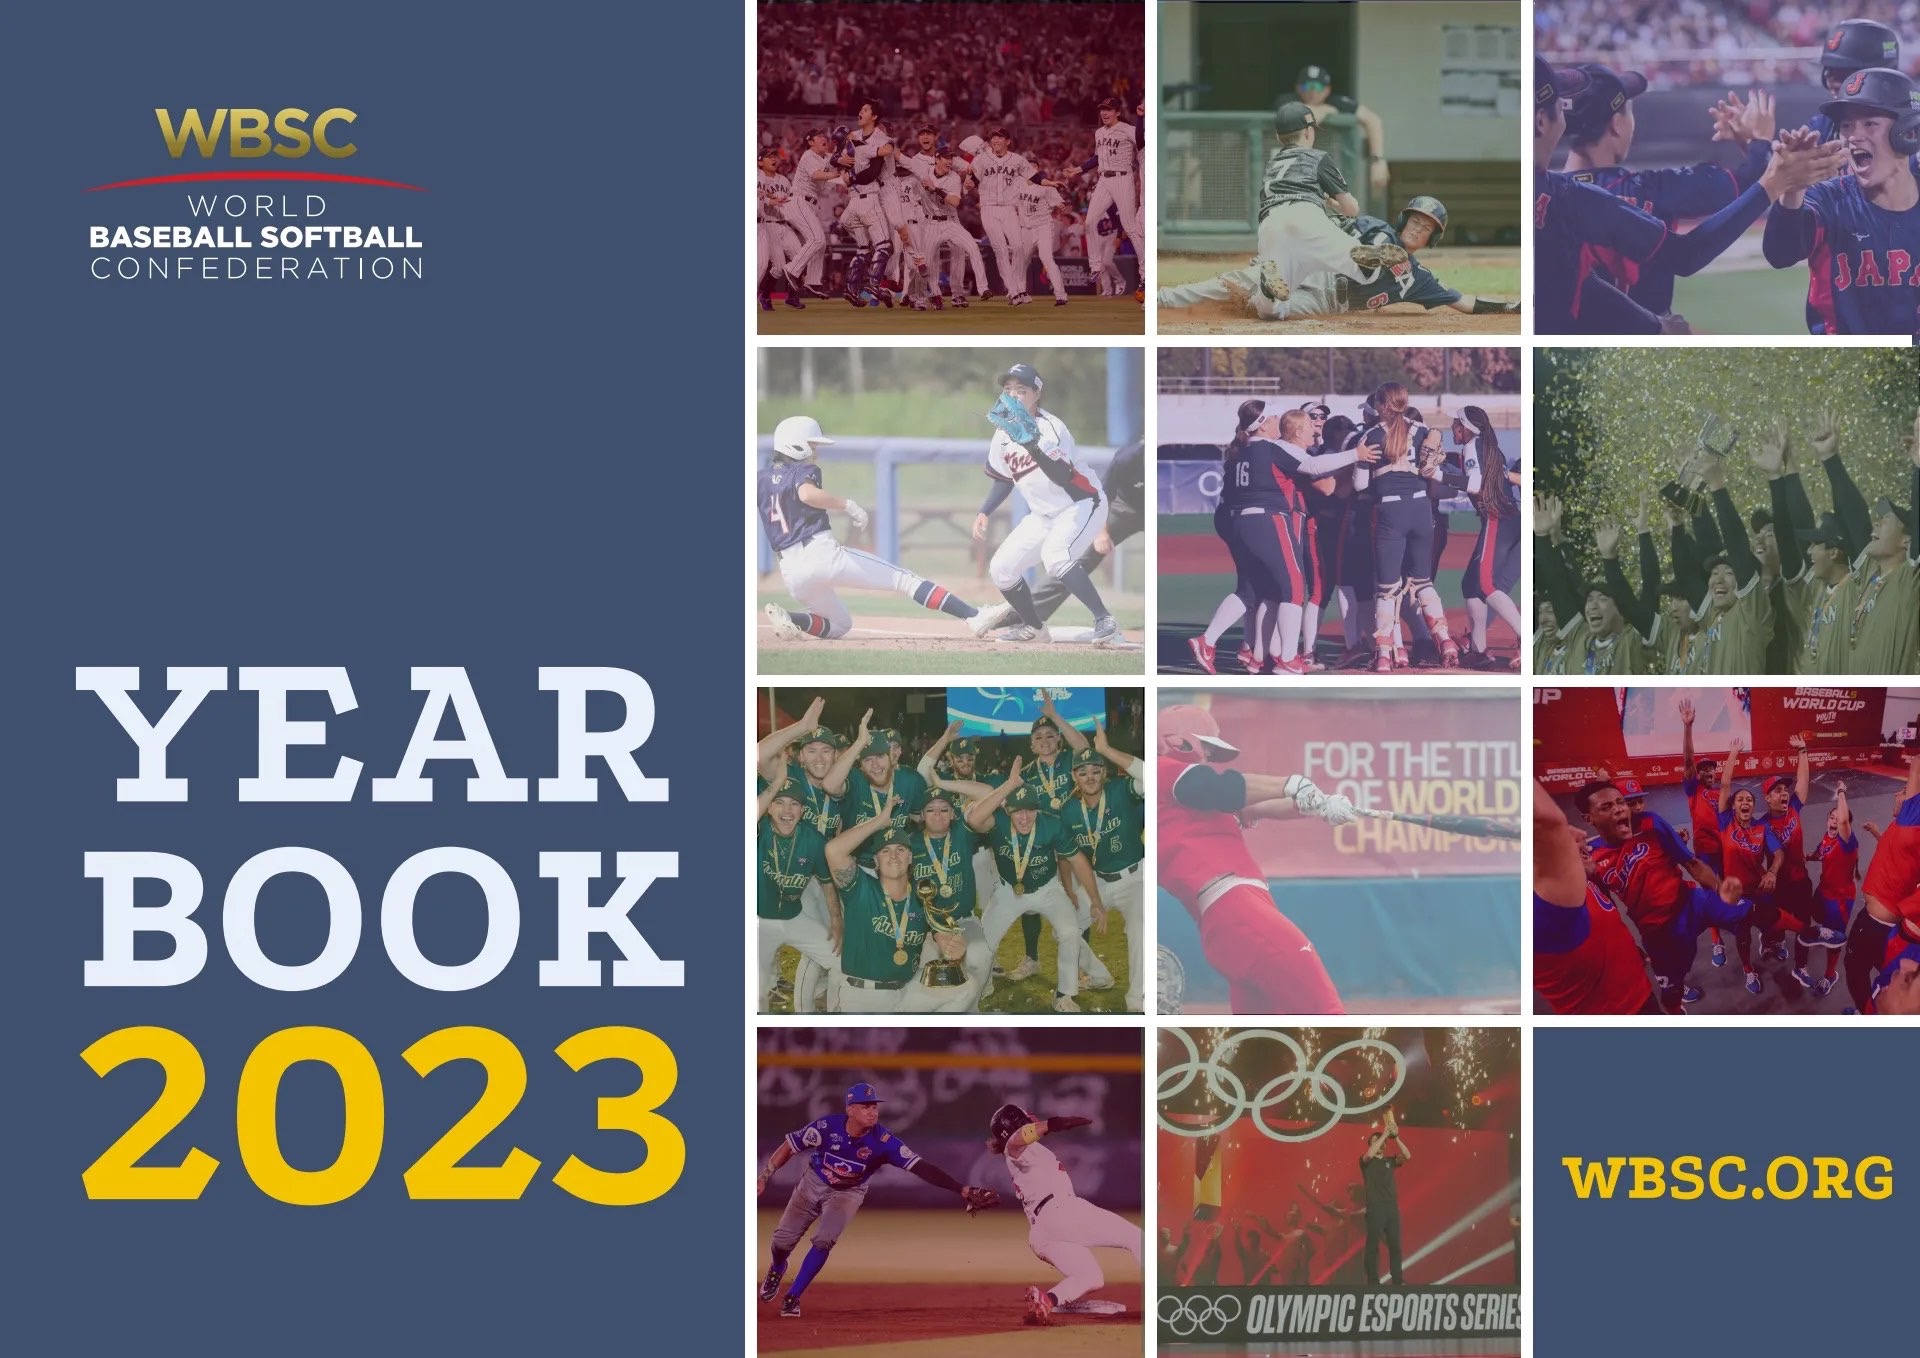 WBSC Yearbook 2023